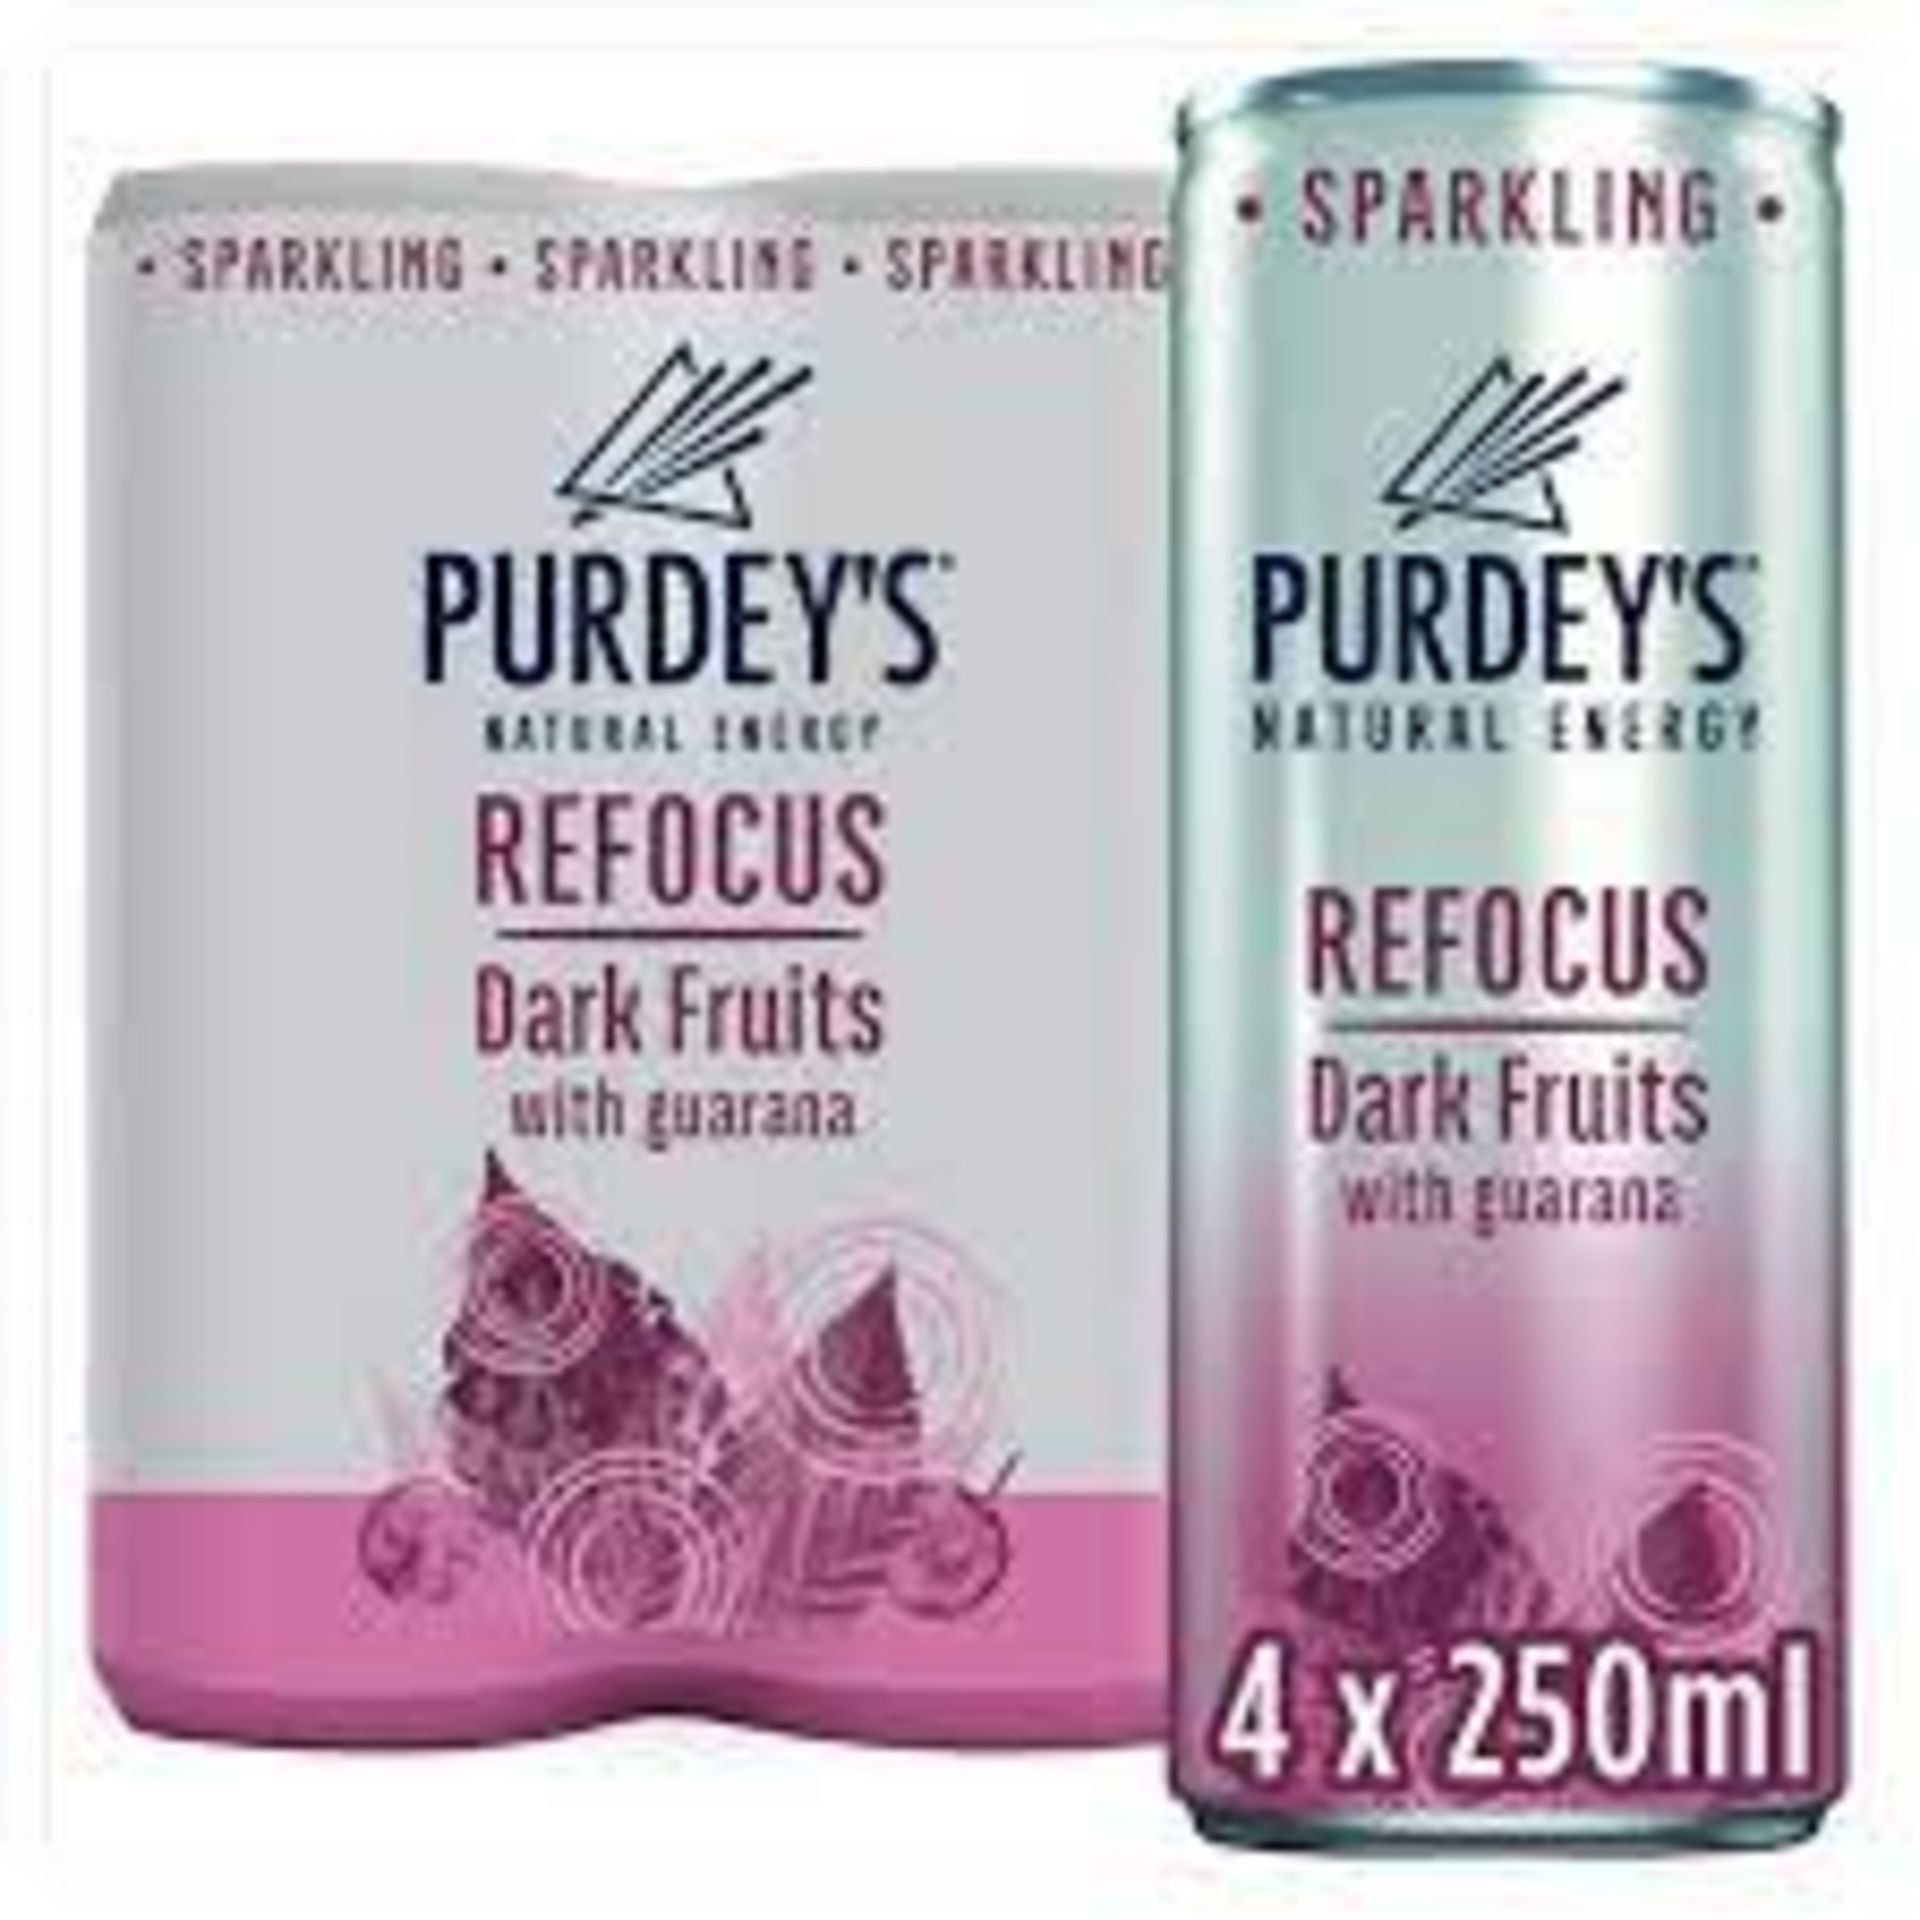 RRP £1245 (Count 498) Spw53F0801V Purdey'S Natural Energy Refocus Dark Fruits With Guarana, 4 X 250